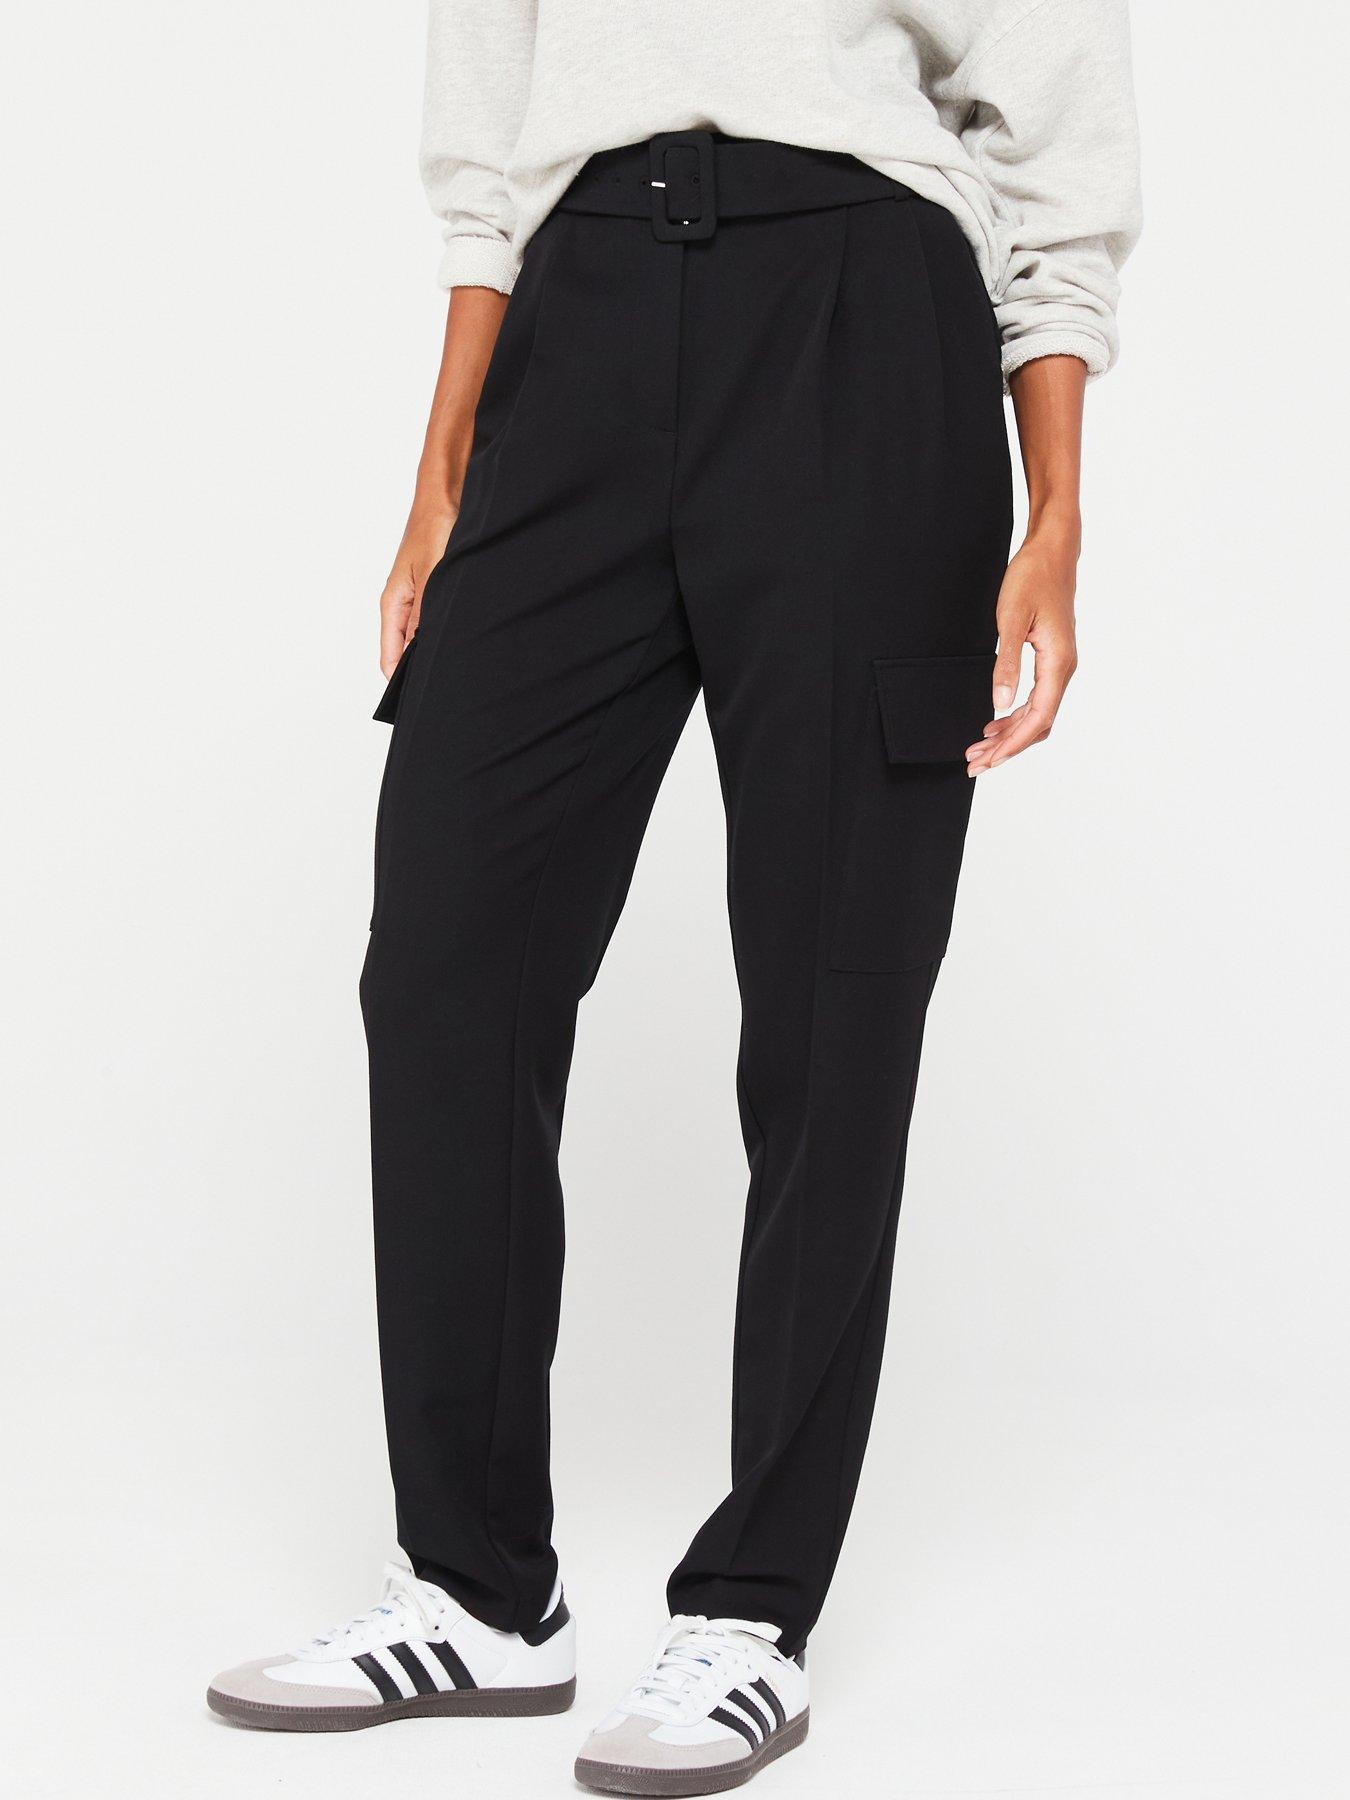 New Look Black Cotton Cuffed Cargo Trousers